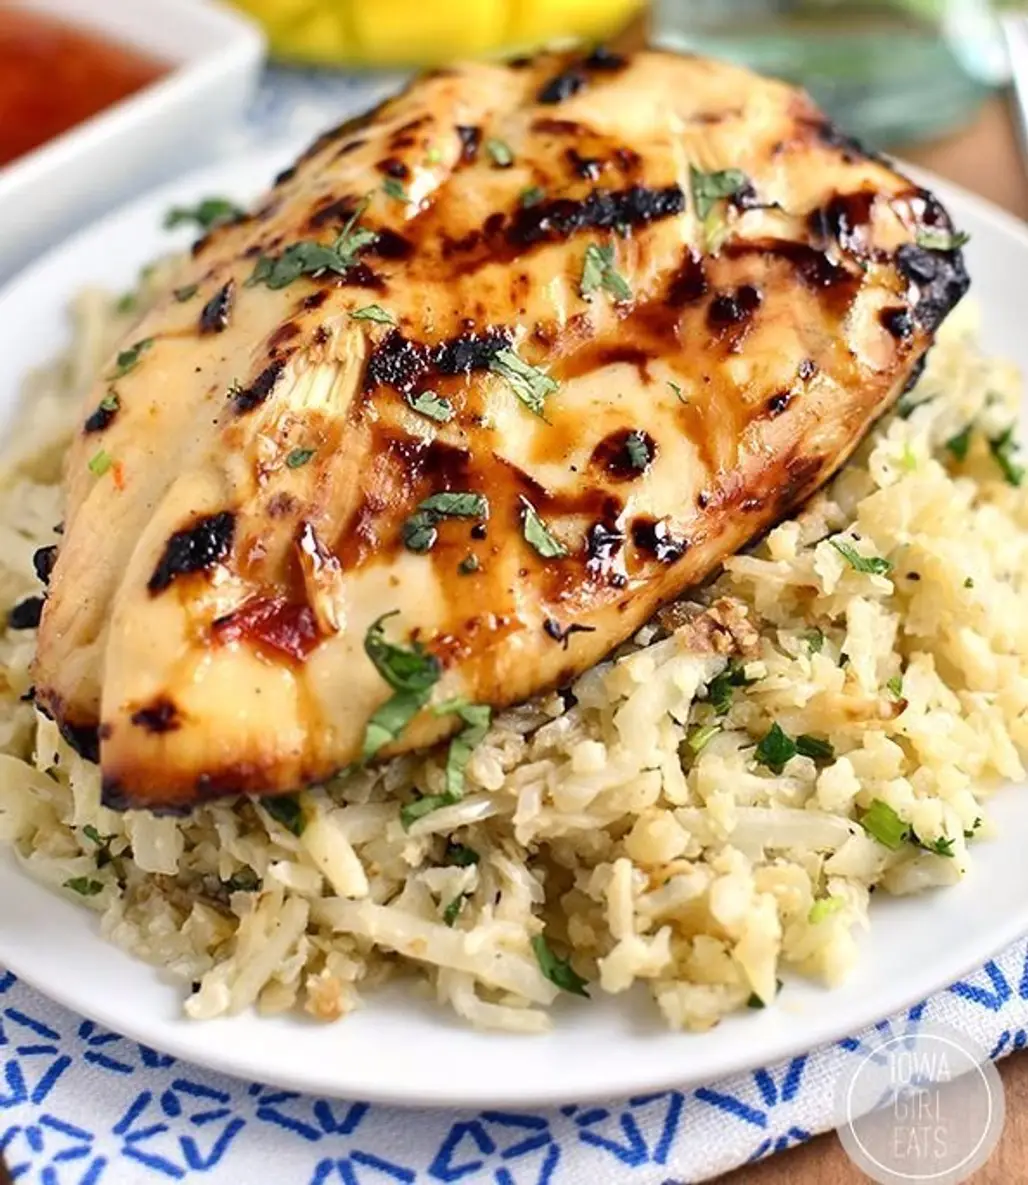 Sweet Chili Coconut-Lime Grilled Chicken with Coconut-Lime Cauliflower Rice